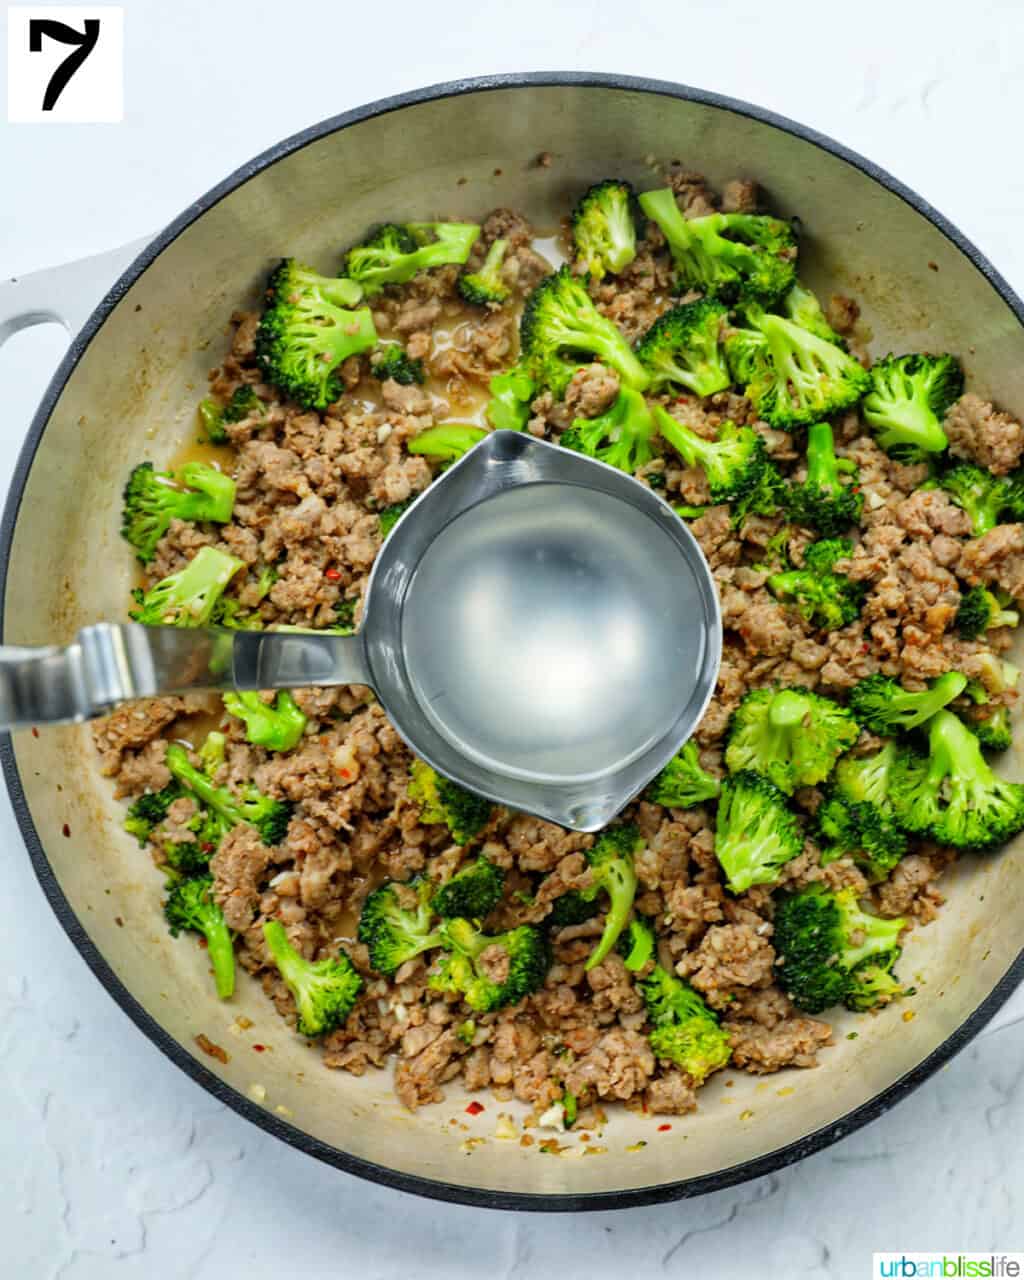 ladle with hot starchy pasta water over a large skillet of broccoli and Italian sausage.